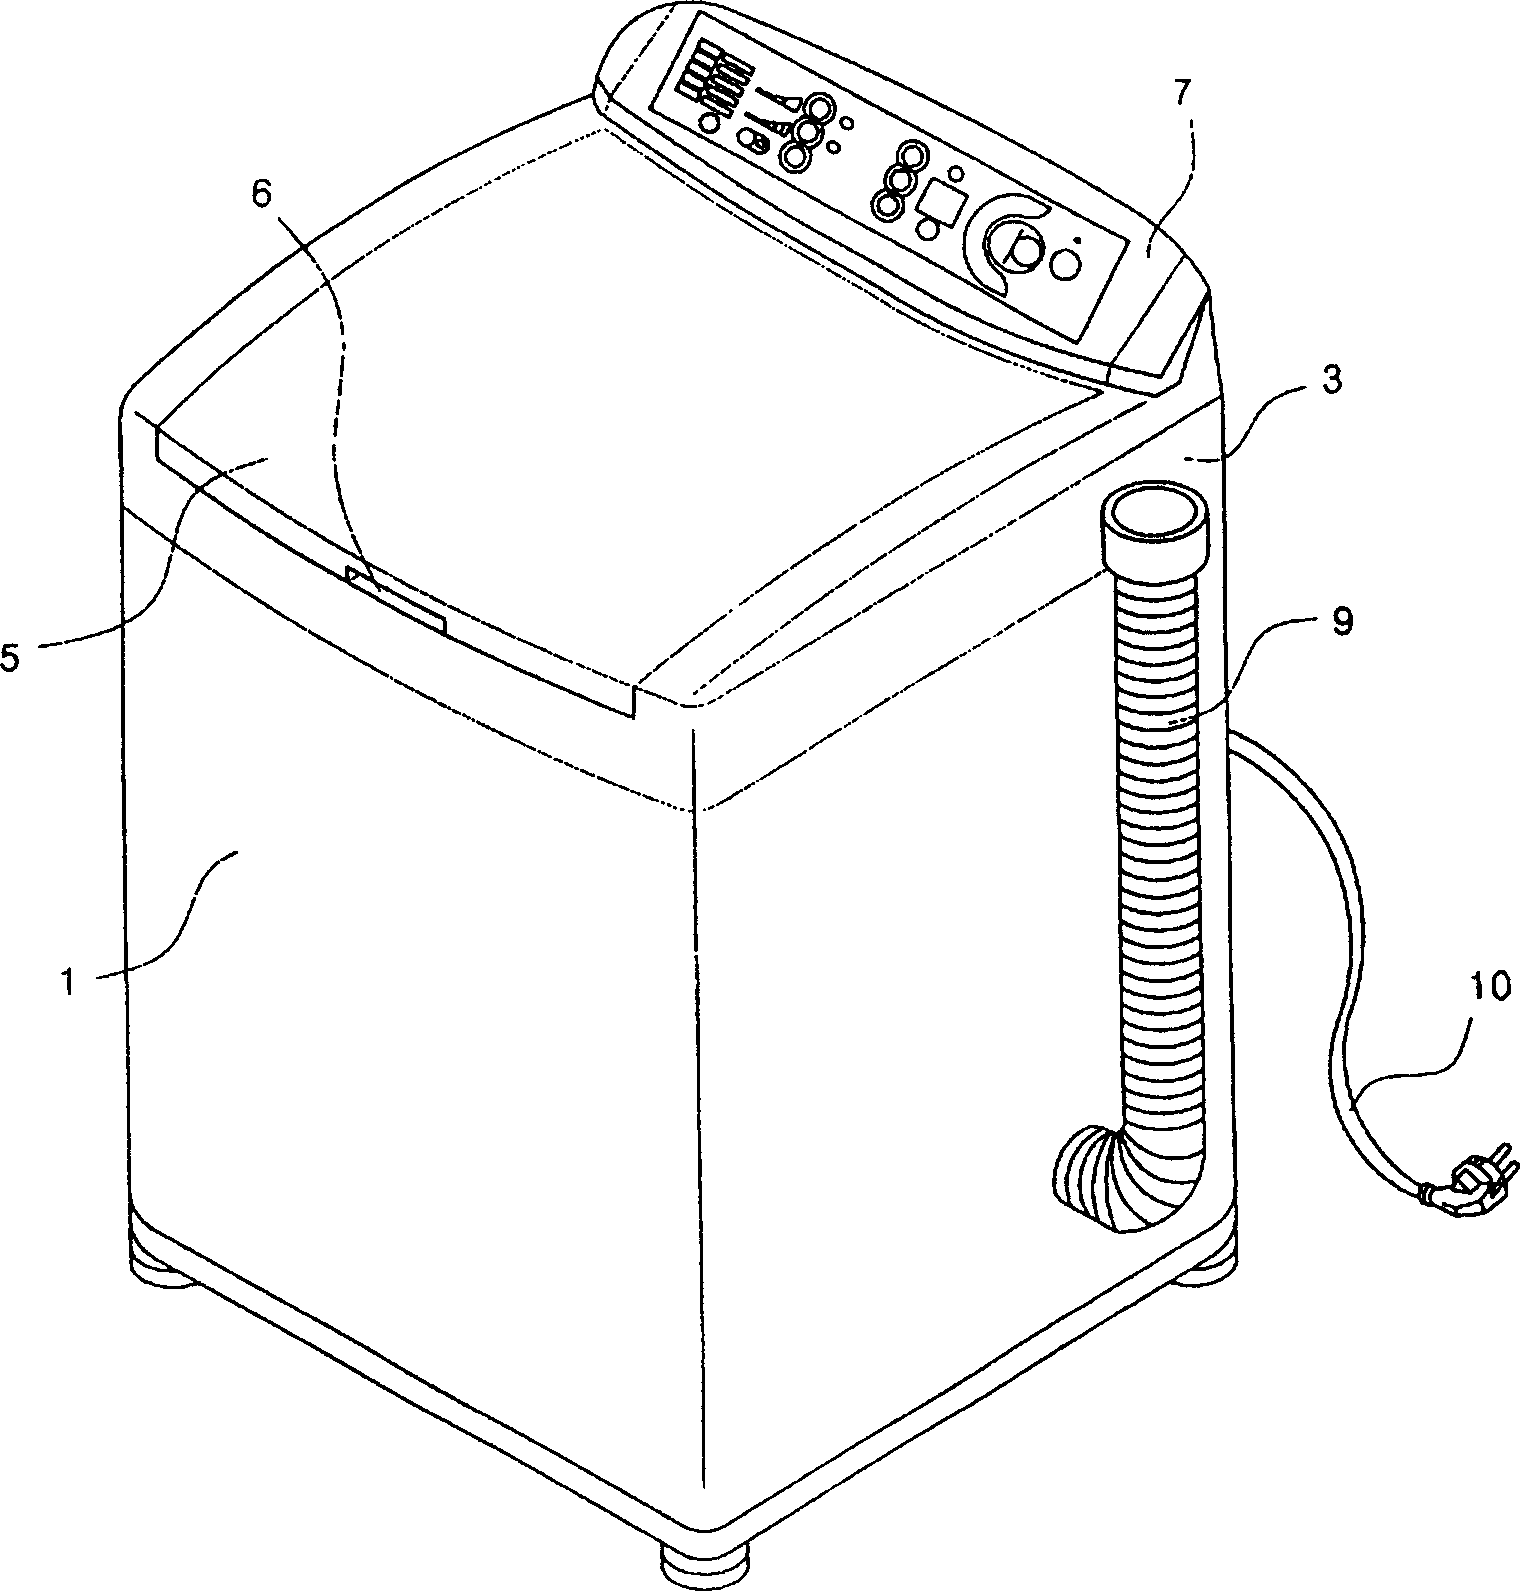 Assemble body of wicket in washing machine